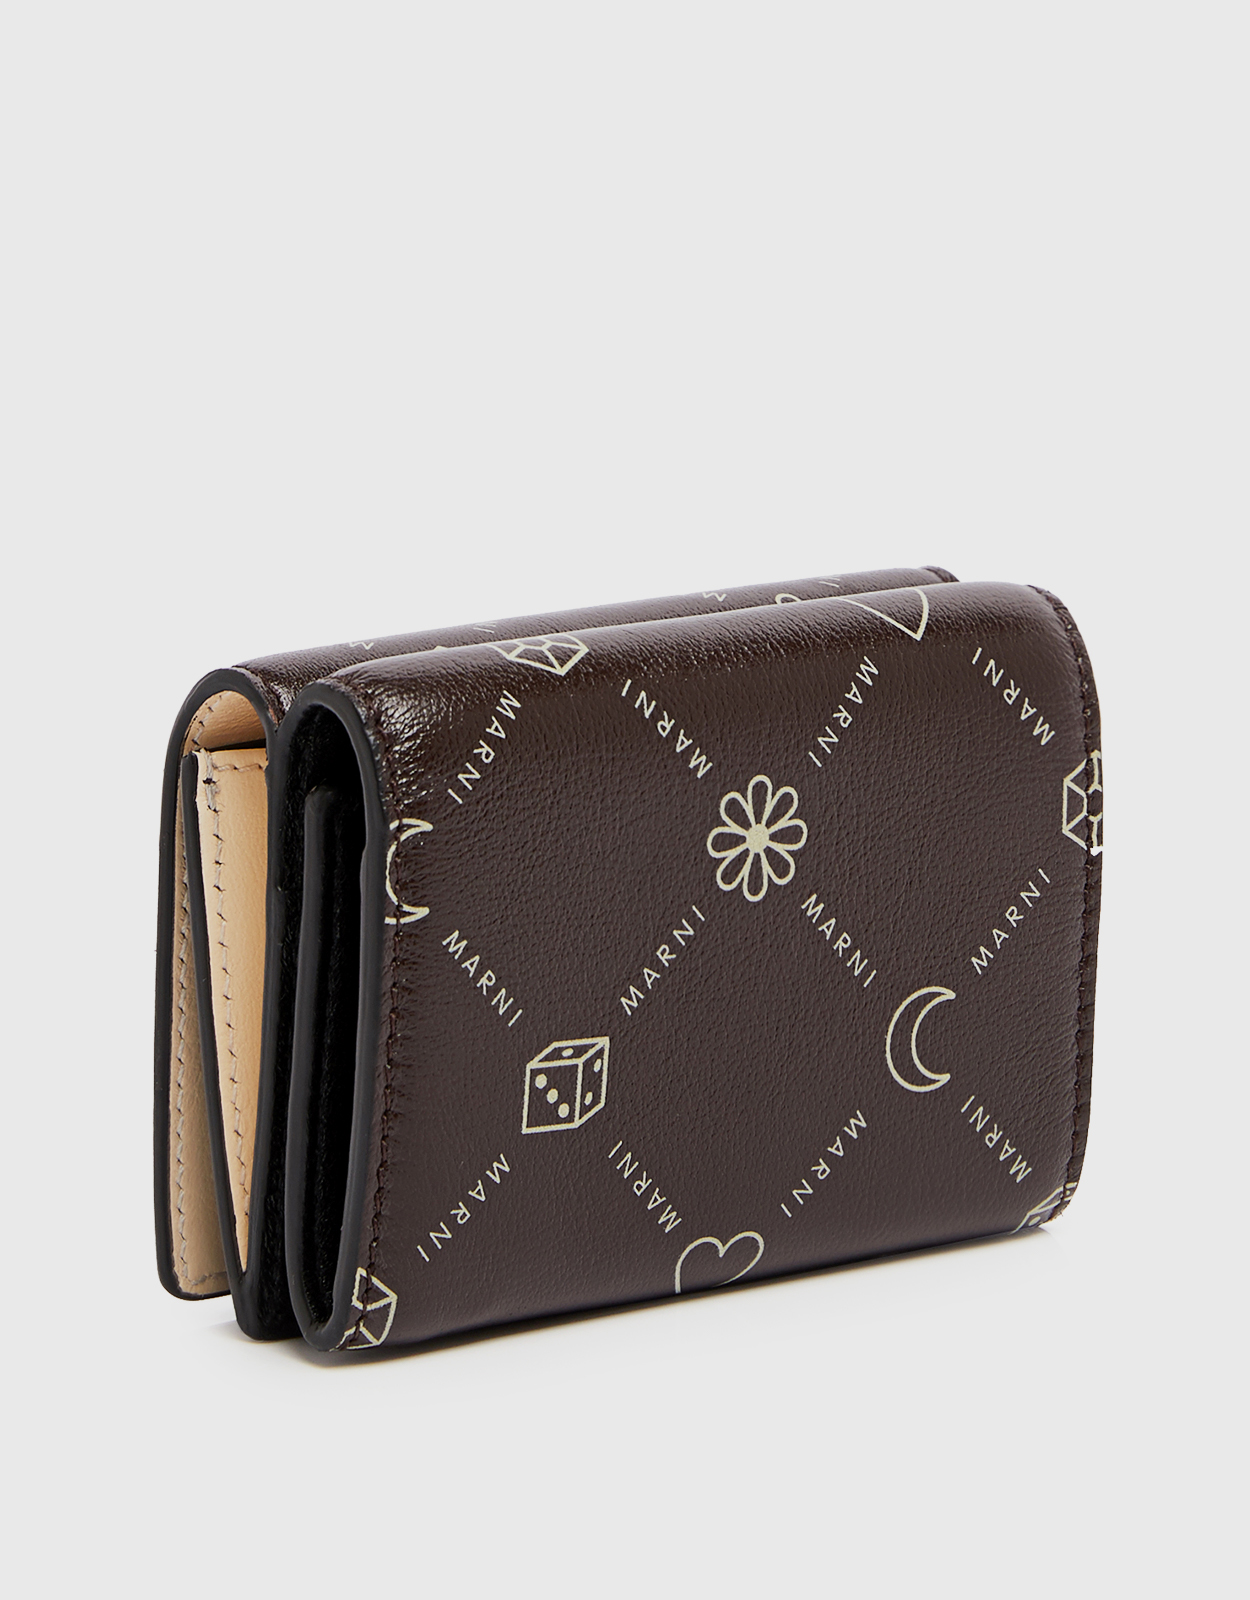 Marni Marni Logo Calfskin Tri-fold Wallet-Brown (Wallets and Small Leather  Goods,Wallets) IFCHIC.COM